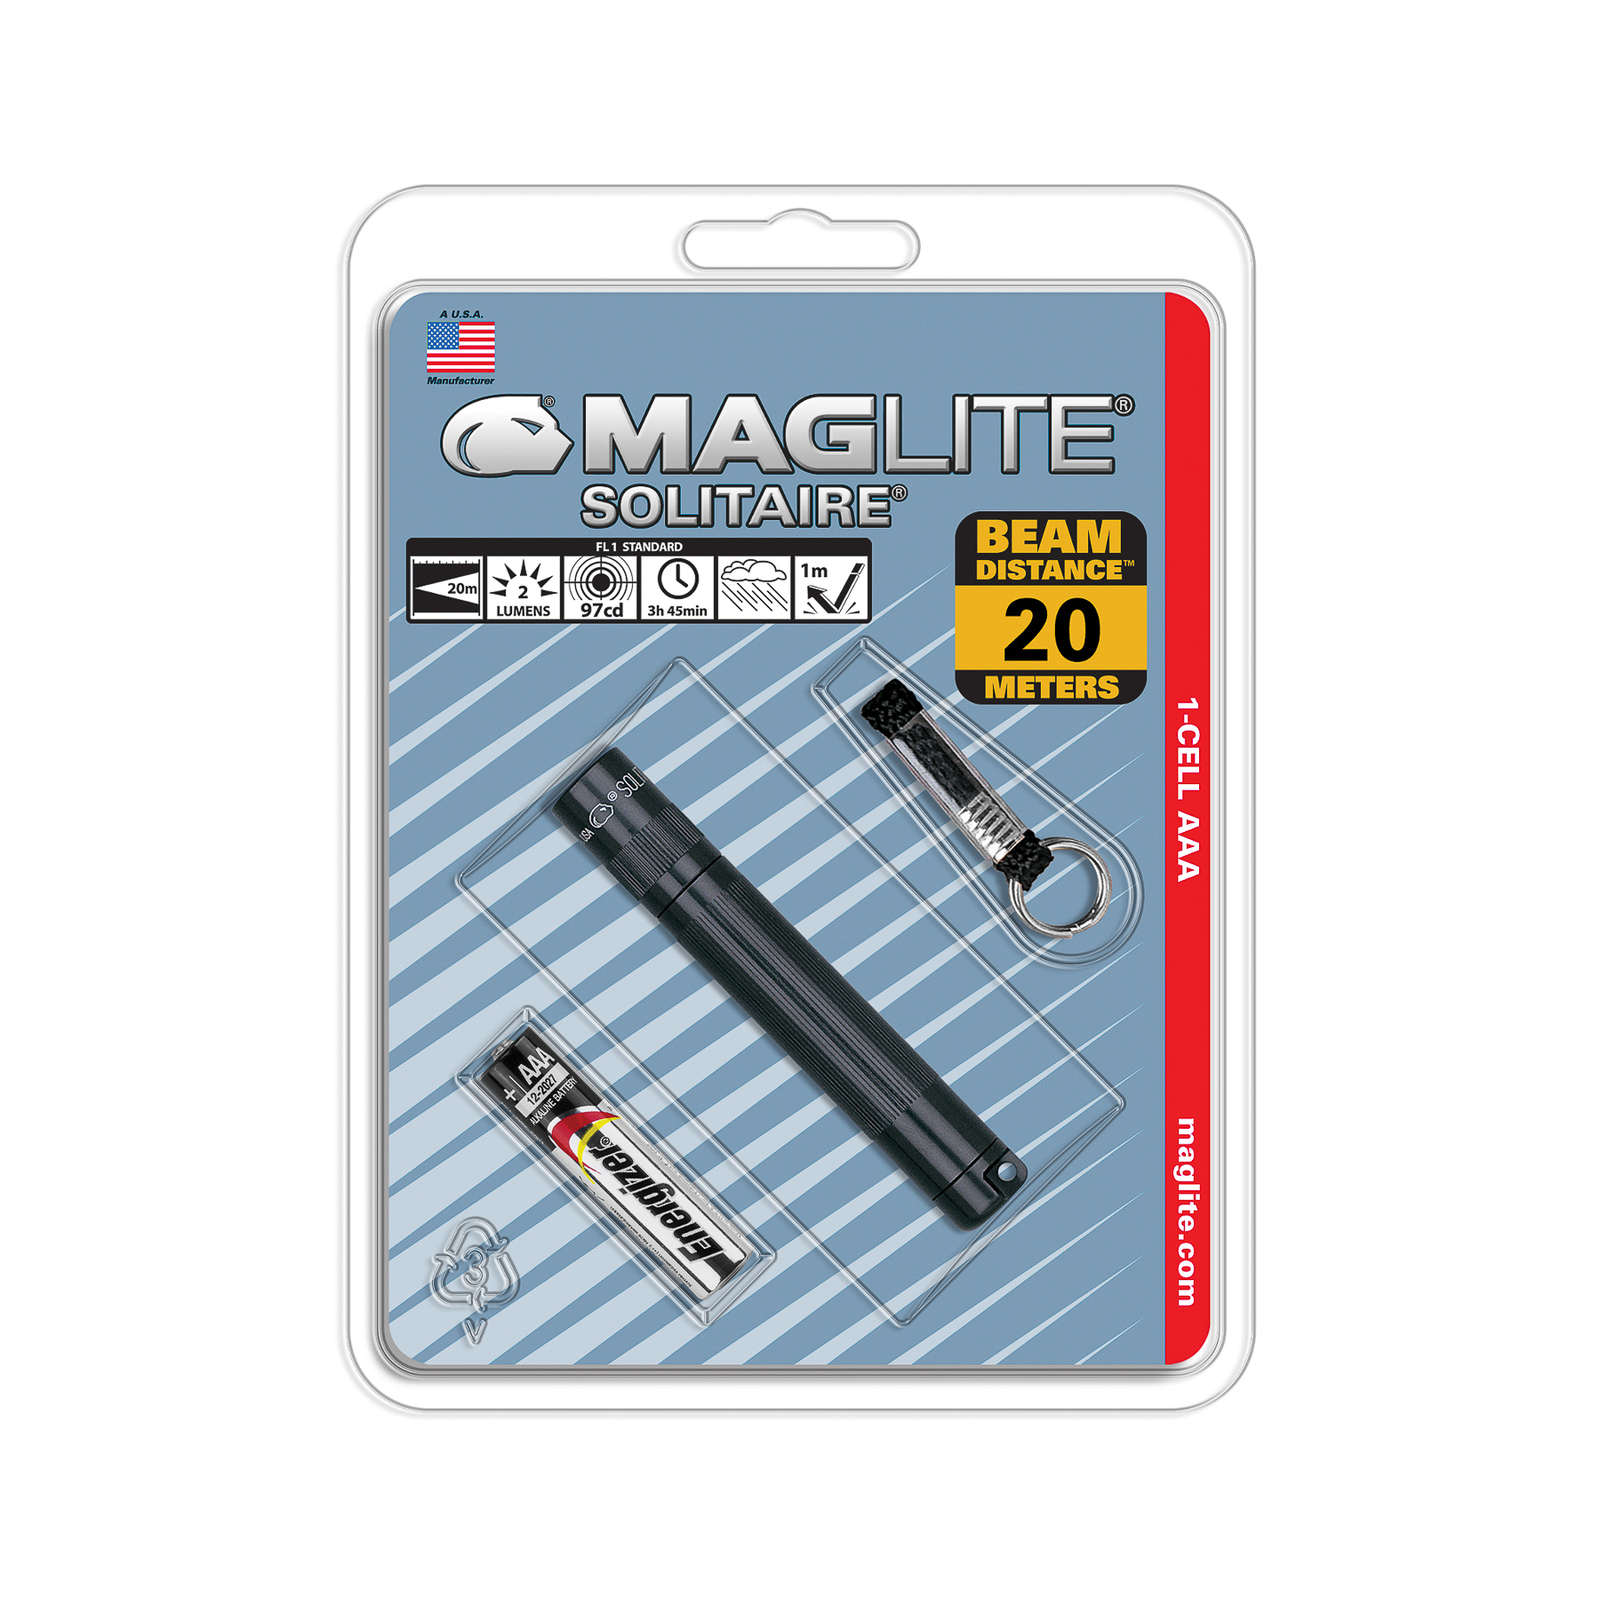 Maglite Xenon ficklampa Solitaire 1-cell AAA svart